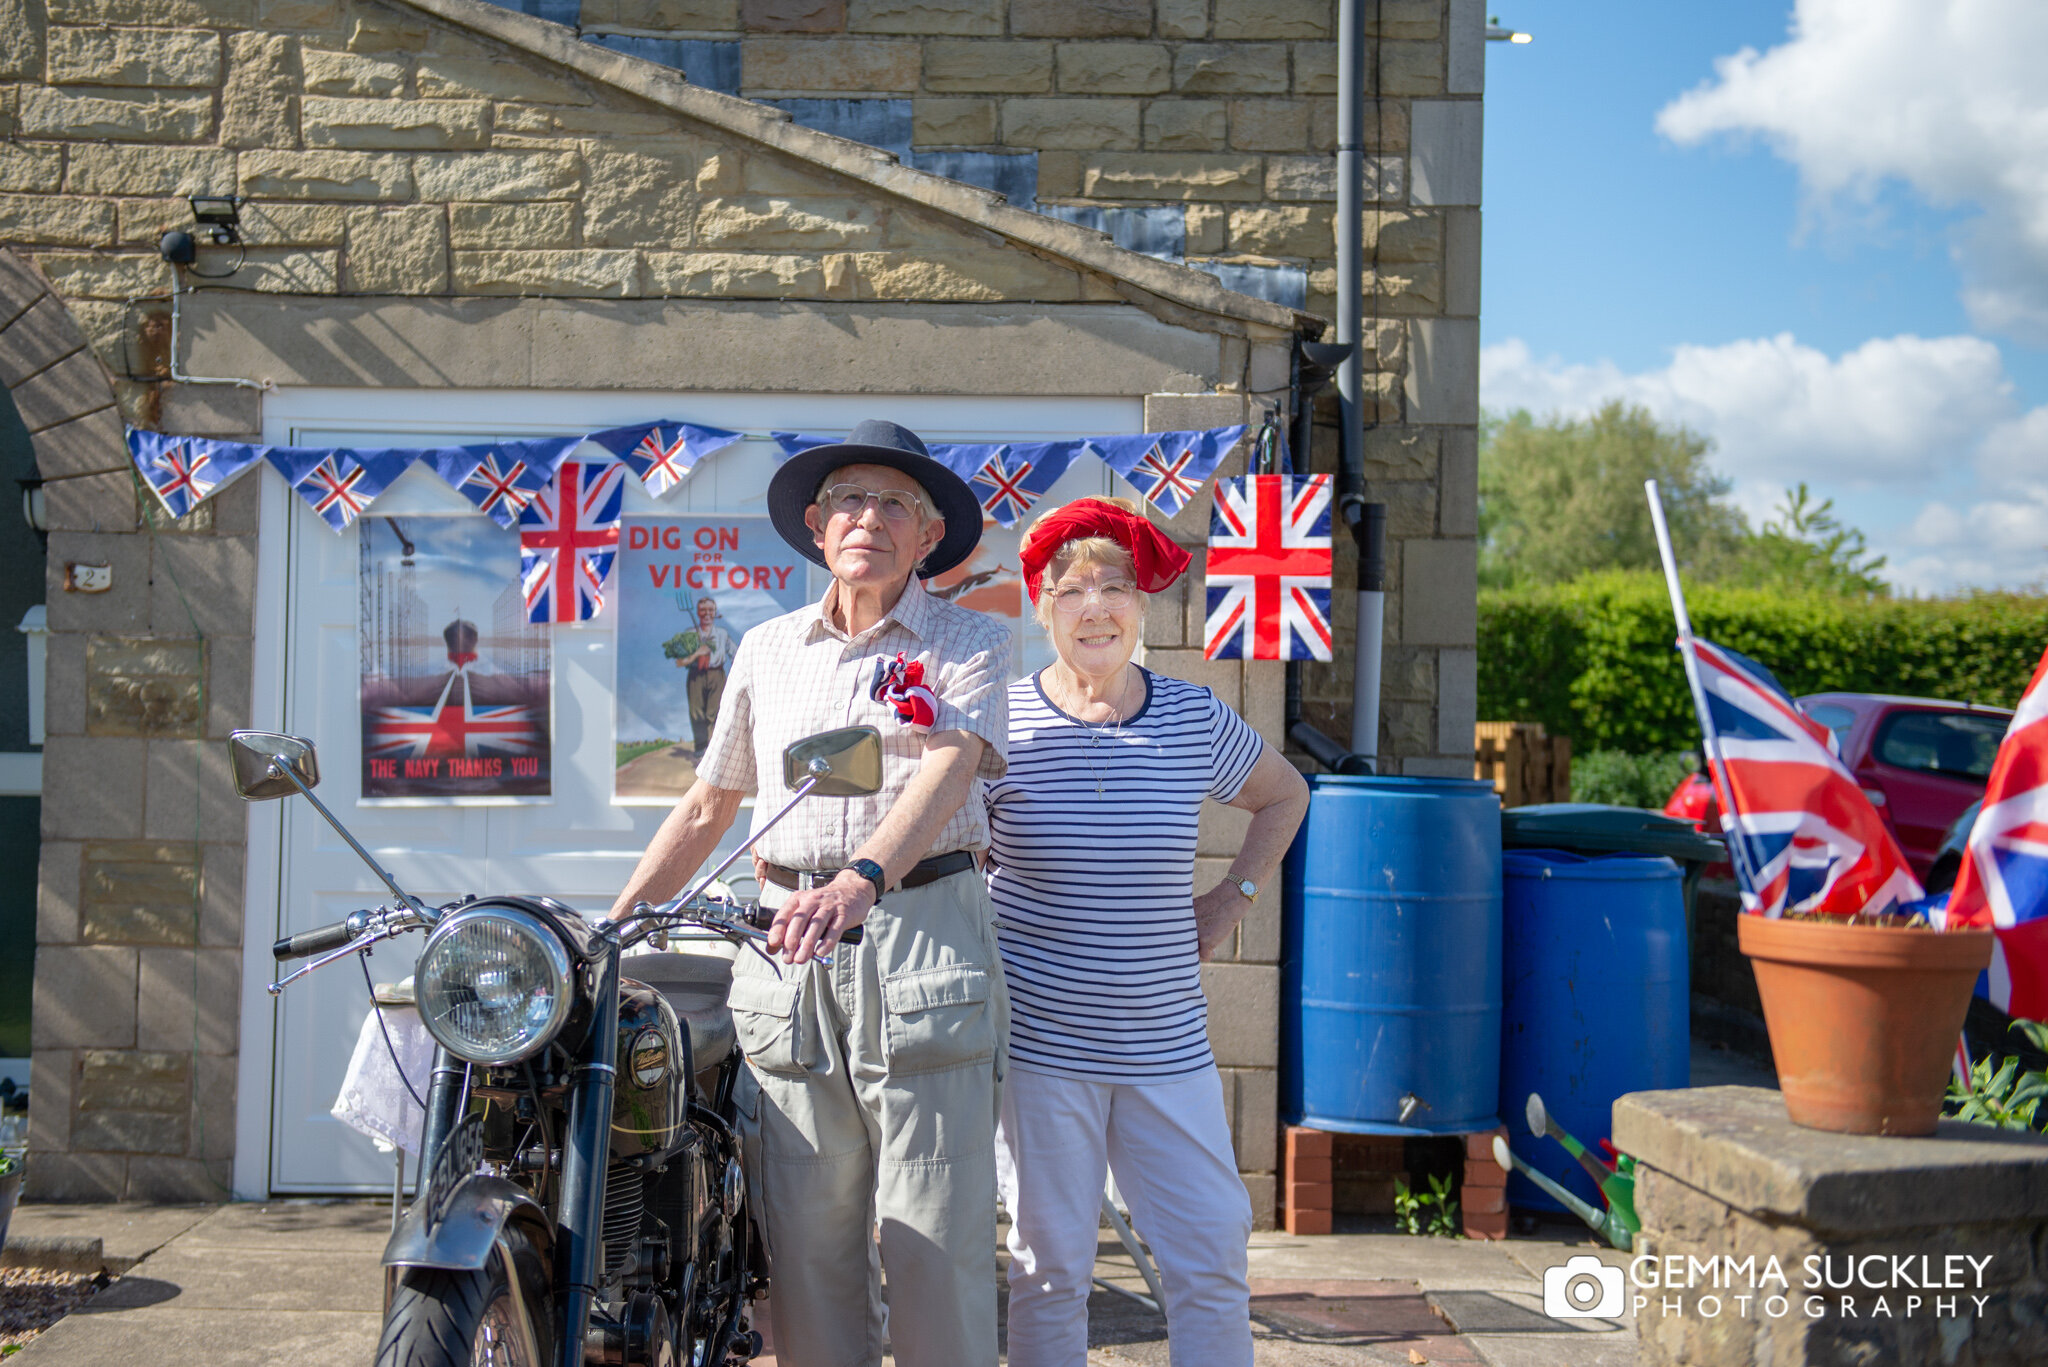 a doorstep portrait of an elderly man with his vintage motorbike and his wife looking proud on VE day